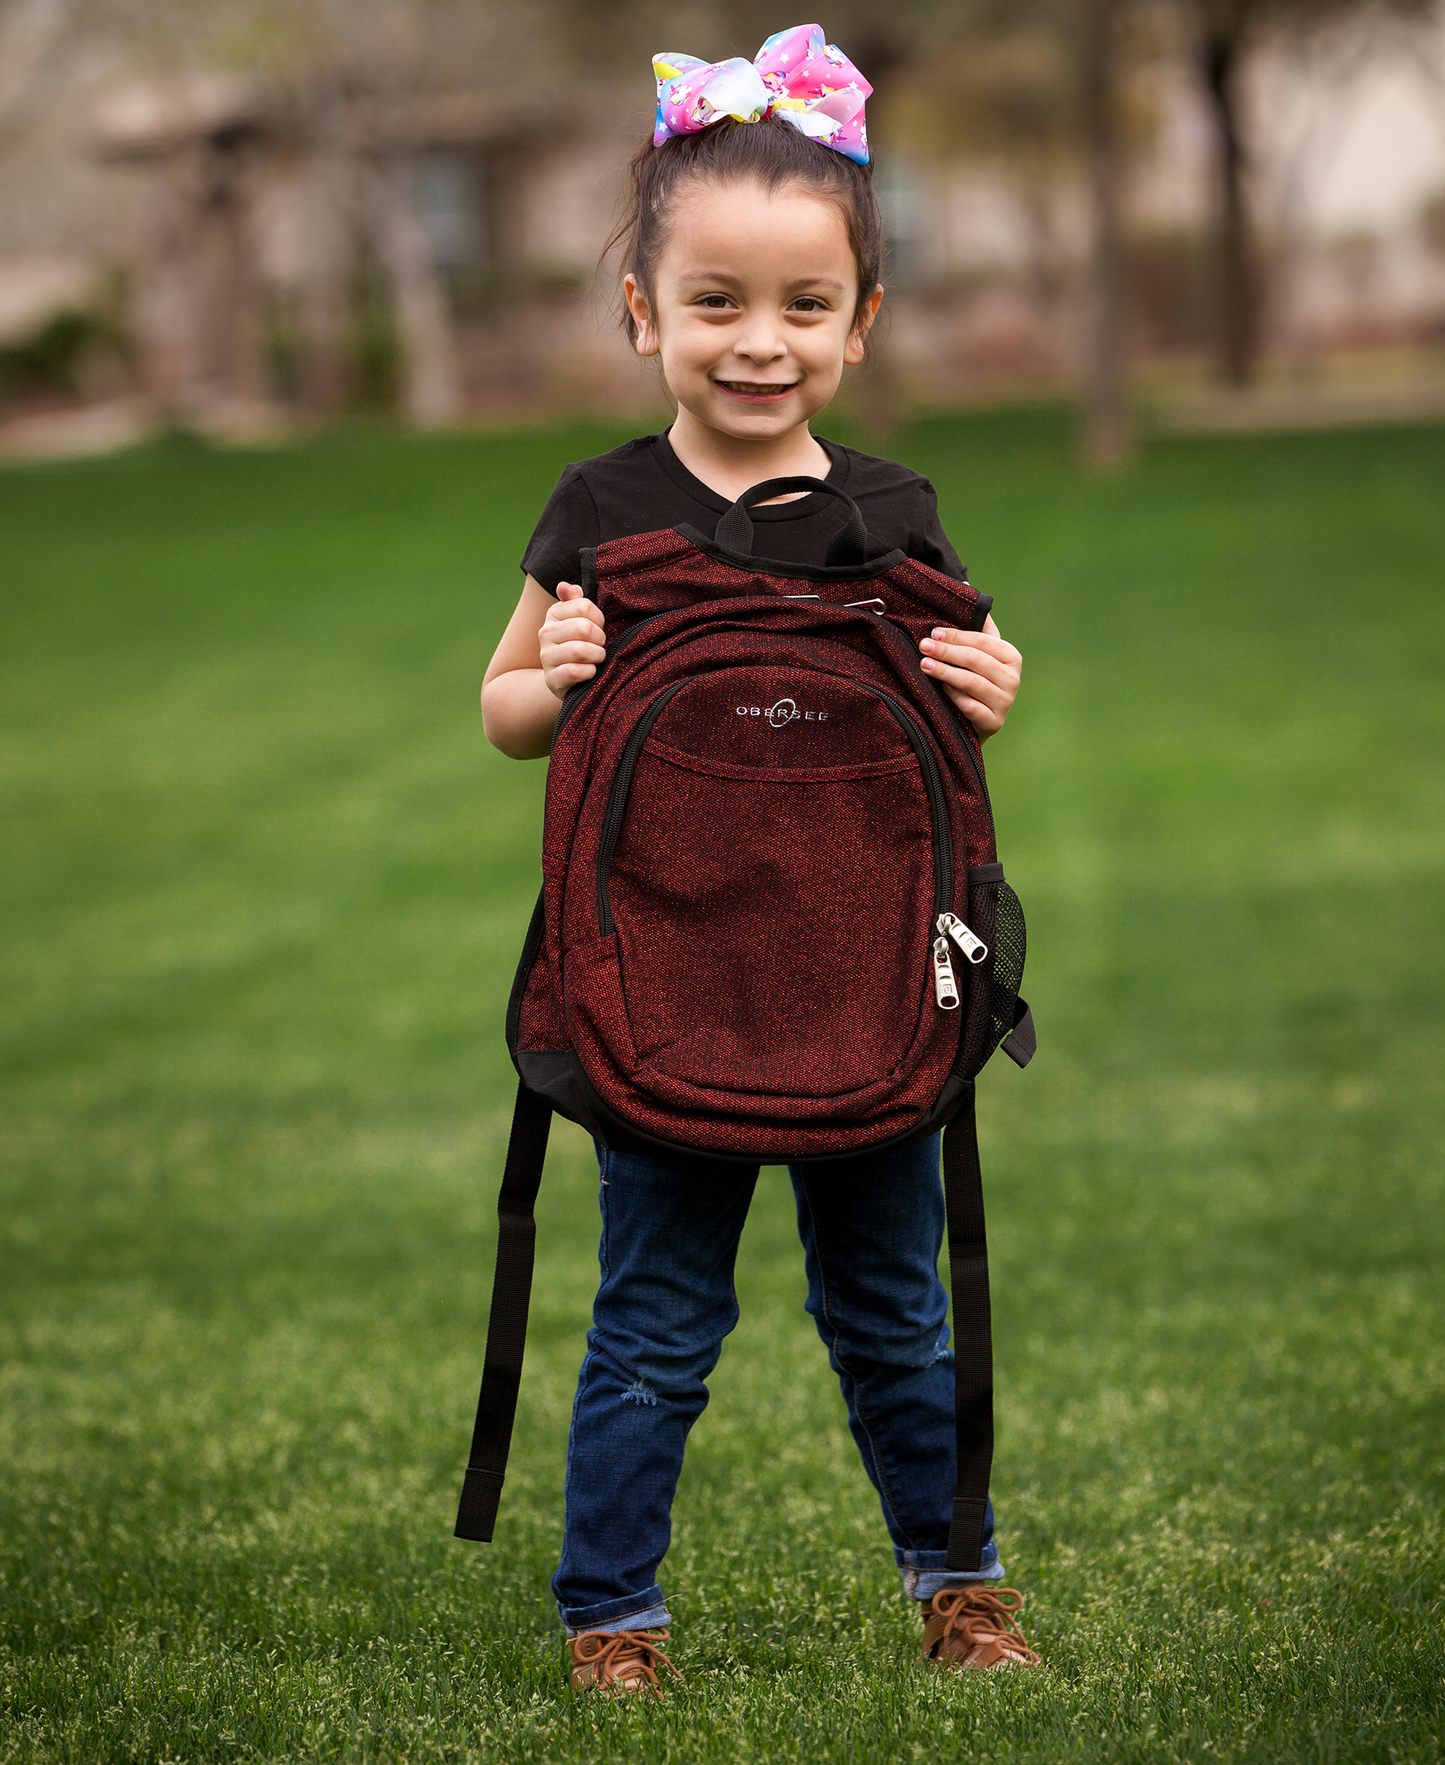 O3KCBP030 Obersee Mini Preschool Backpack for Girls with integrated